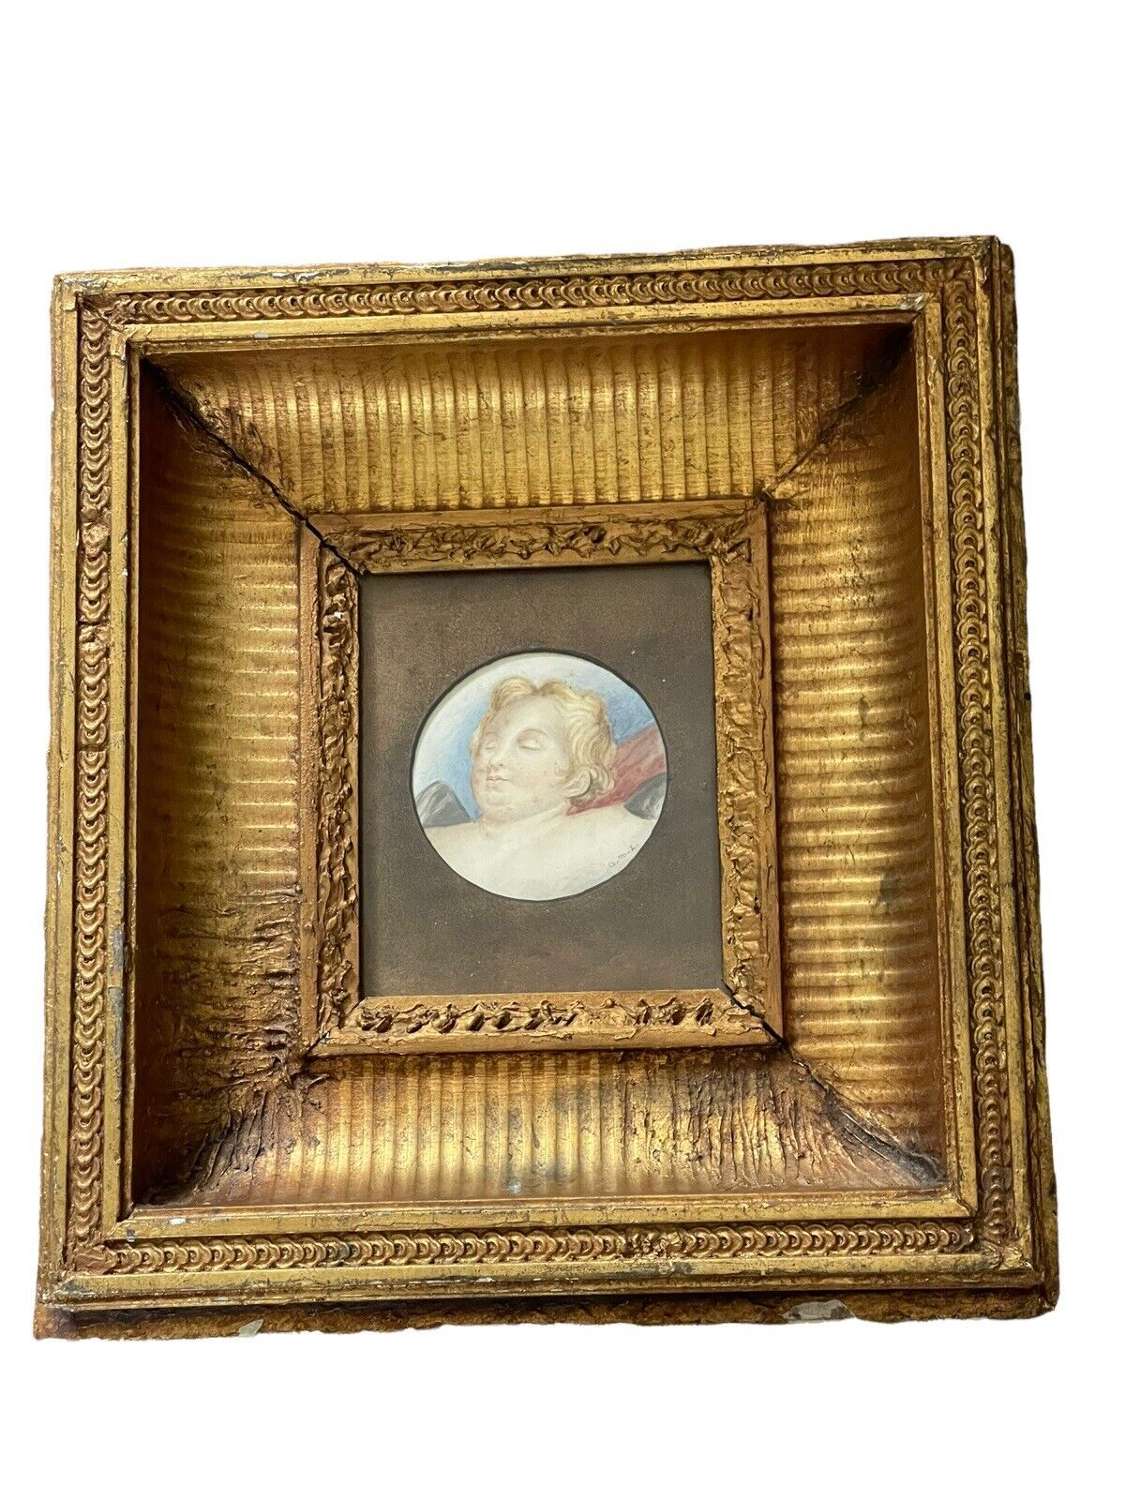 An antique study of a sleeping angel in a 19th Century gilded frame.